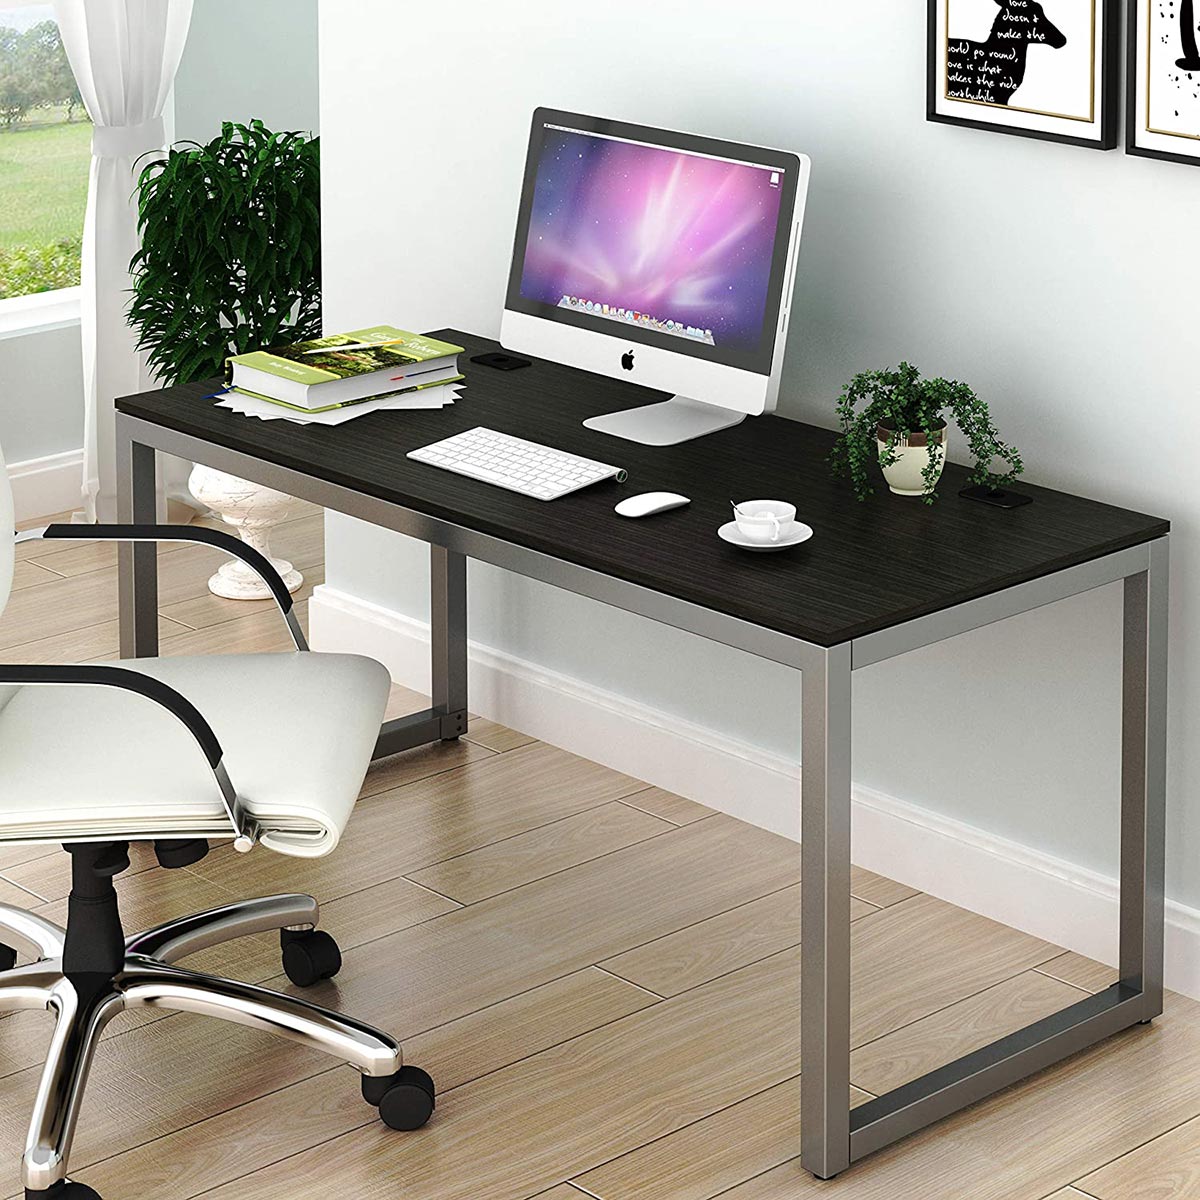 Minimalist Best Desks For Home Office Budget with Dual Monitor